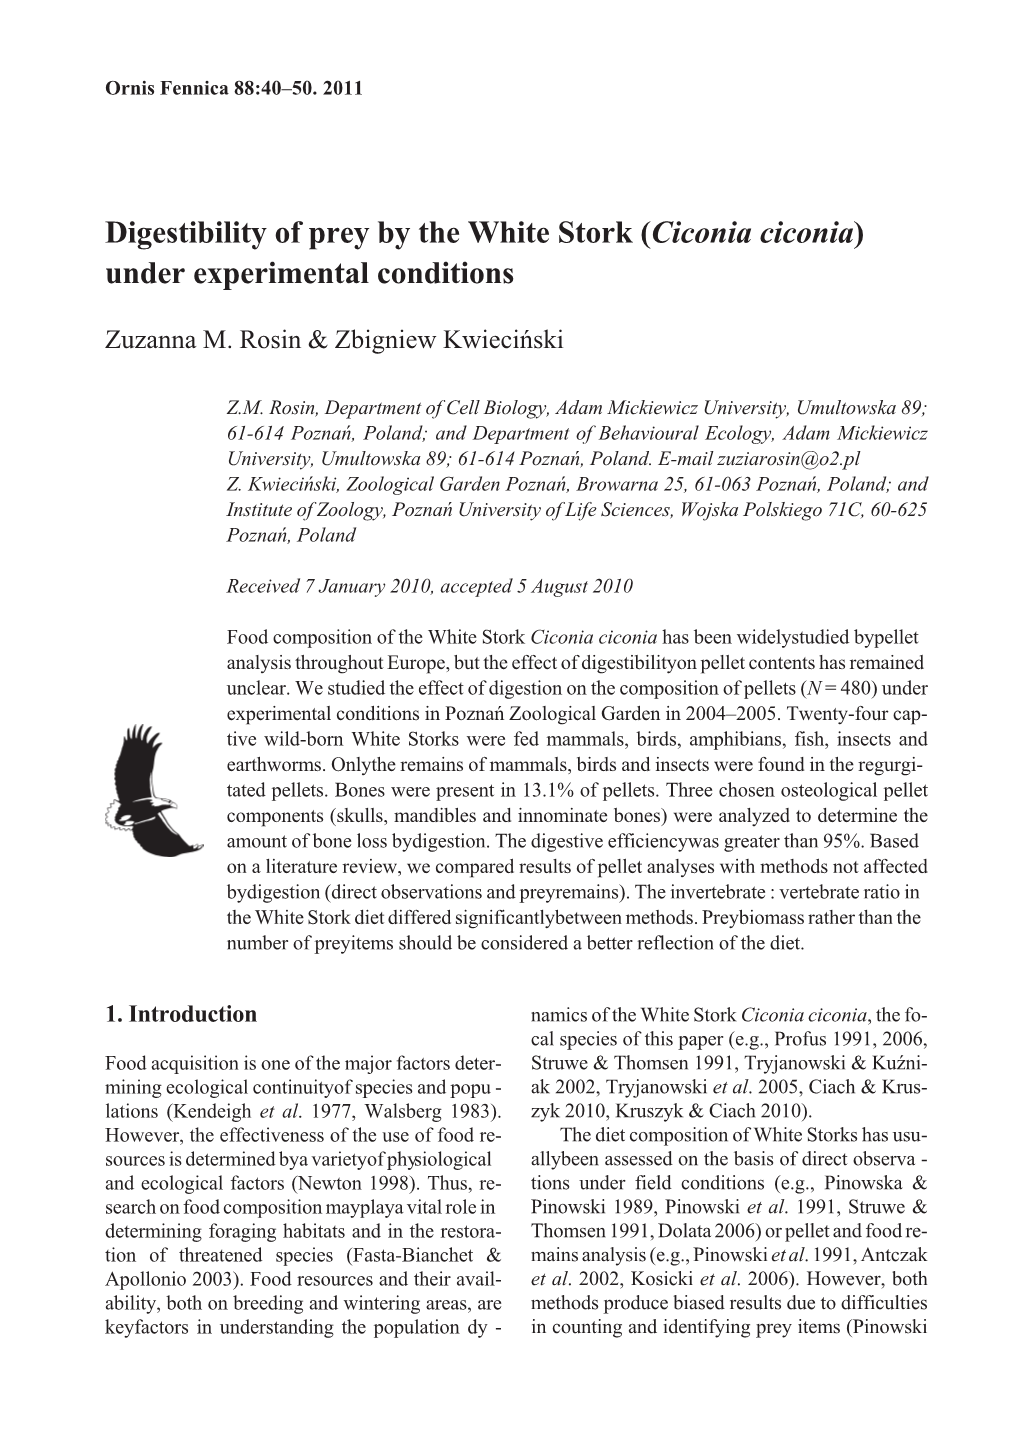 Digestibility of Prey by the White Stork (Ciconia Ciconia) Under Experimental Conditions